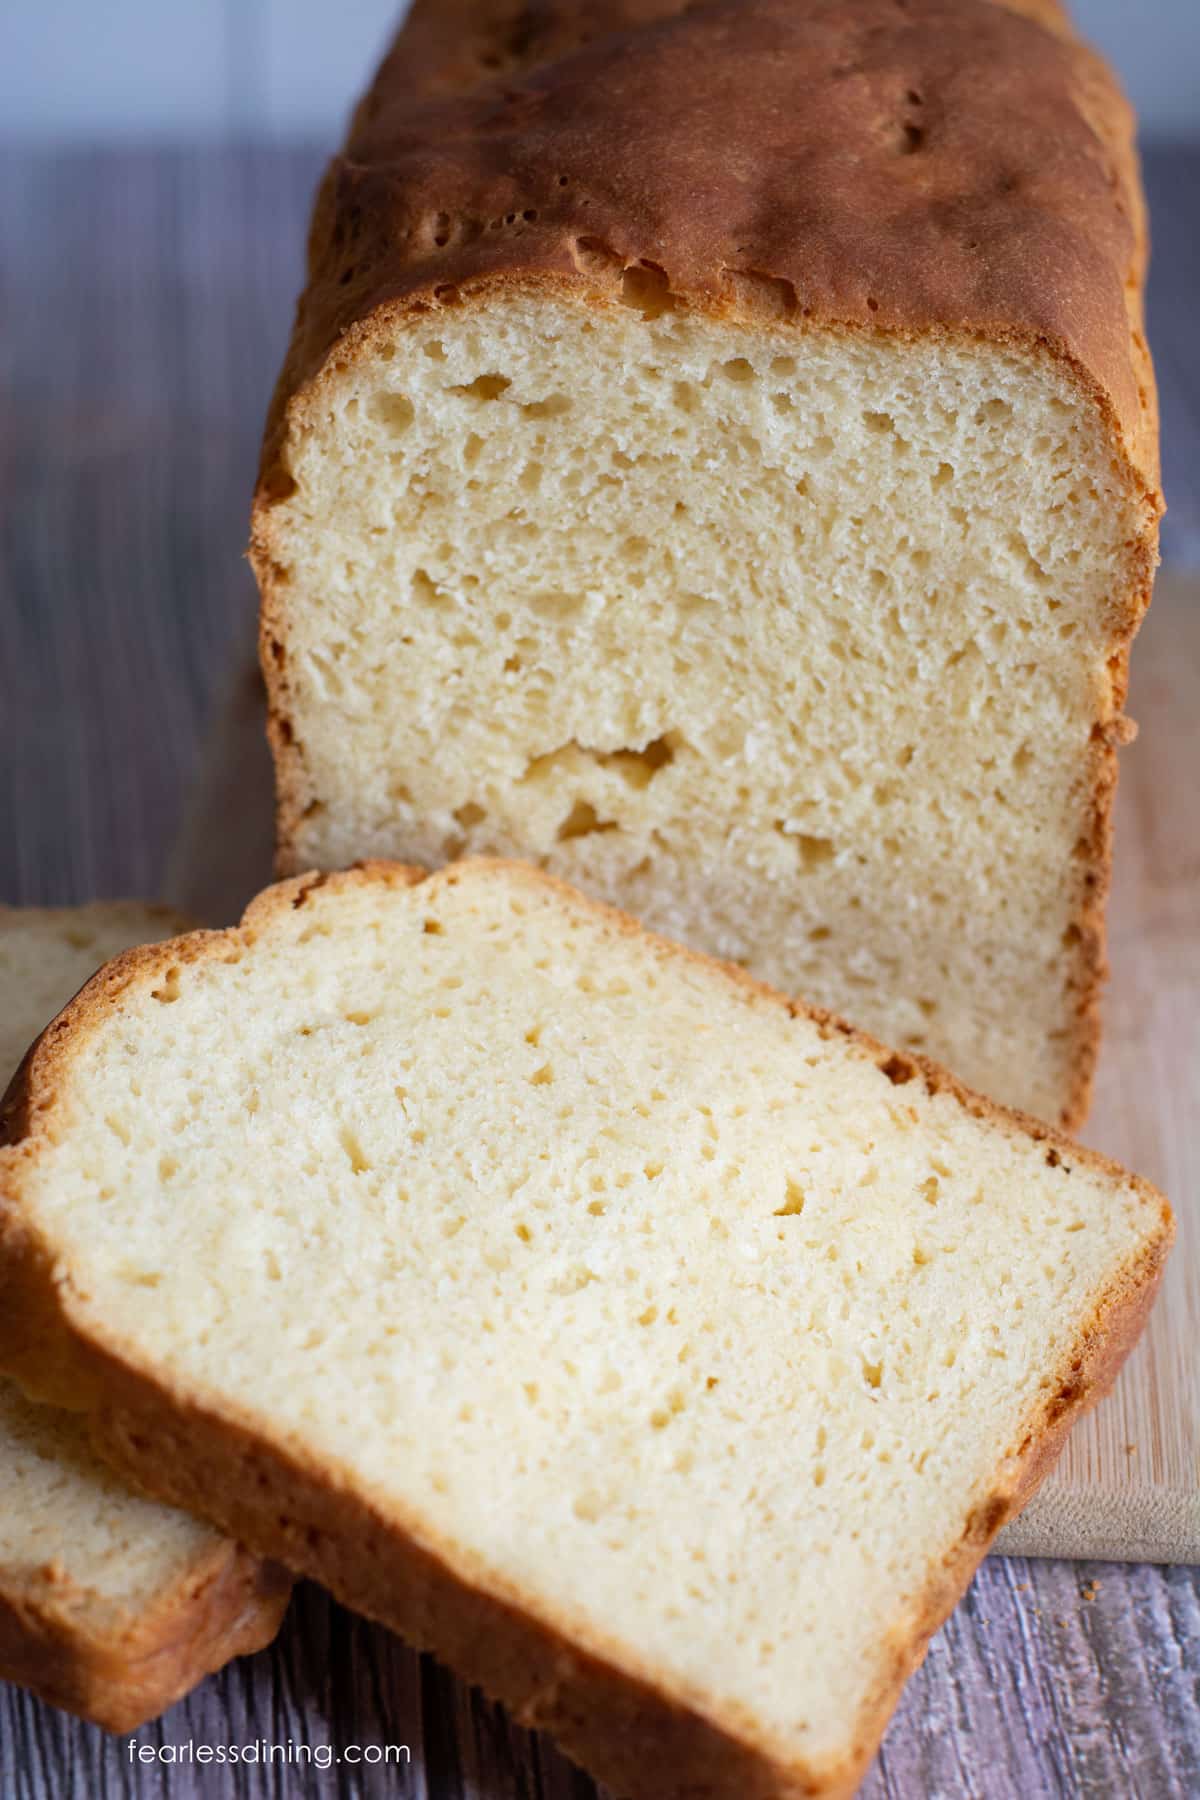 A photo of the bread tested with Cup4Cup flour blend. It is sliced on a cutting board.